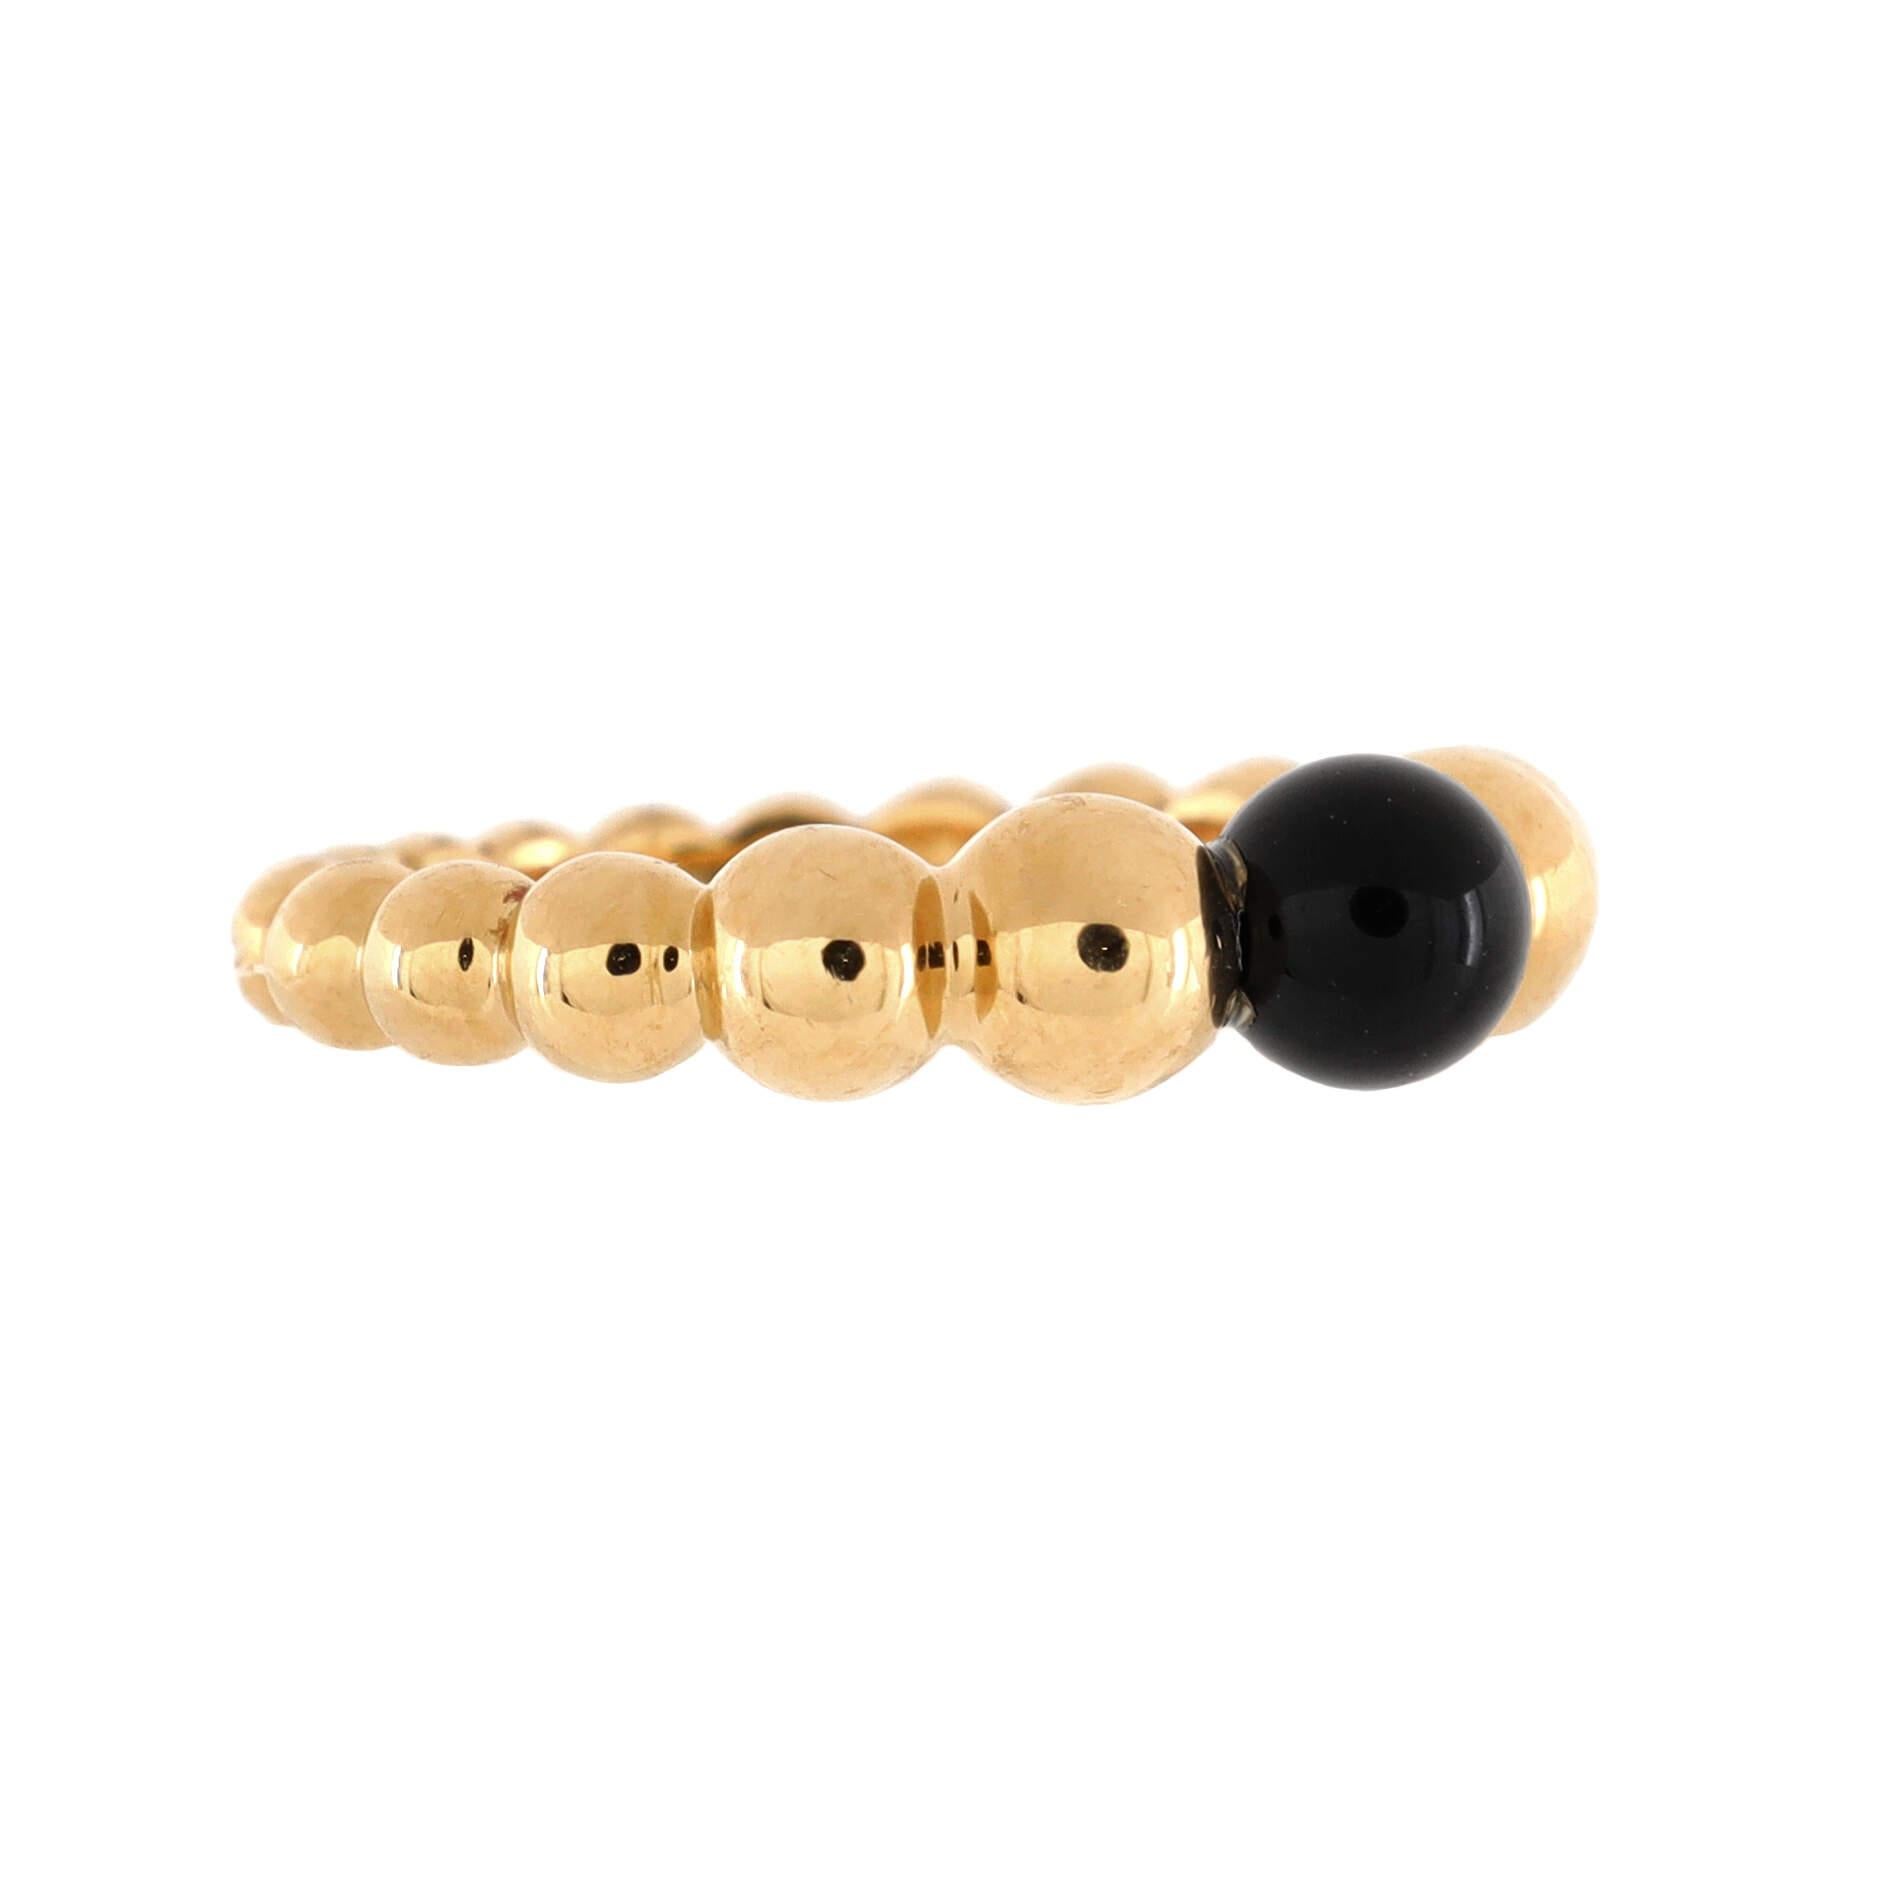 Condition: Very good. Moderate wear throughout.
Accessories: No Accessories
Measurements: Size: 4.25 - 48, Width: 2.30 mm
Designer: Van Cleef & Arpels
Model: Perlee Couleurs Variation Ring 18K Yellow Gold with Onyx
Exterior Color: Yellow Gold
Item